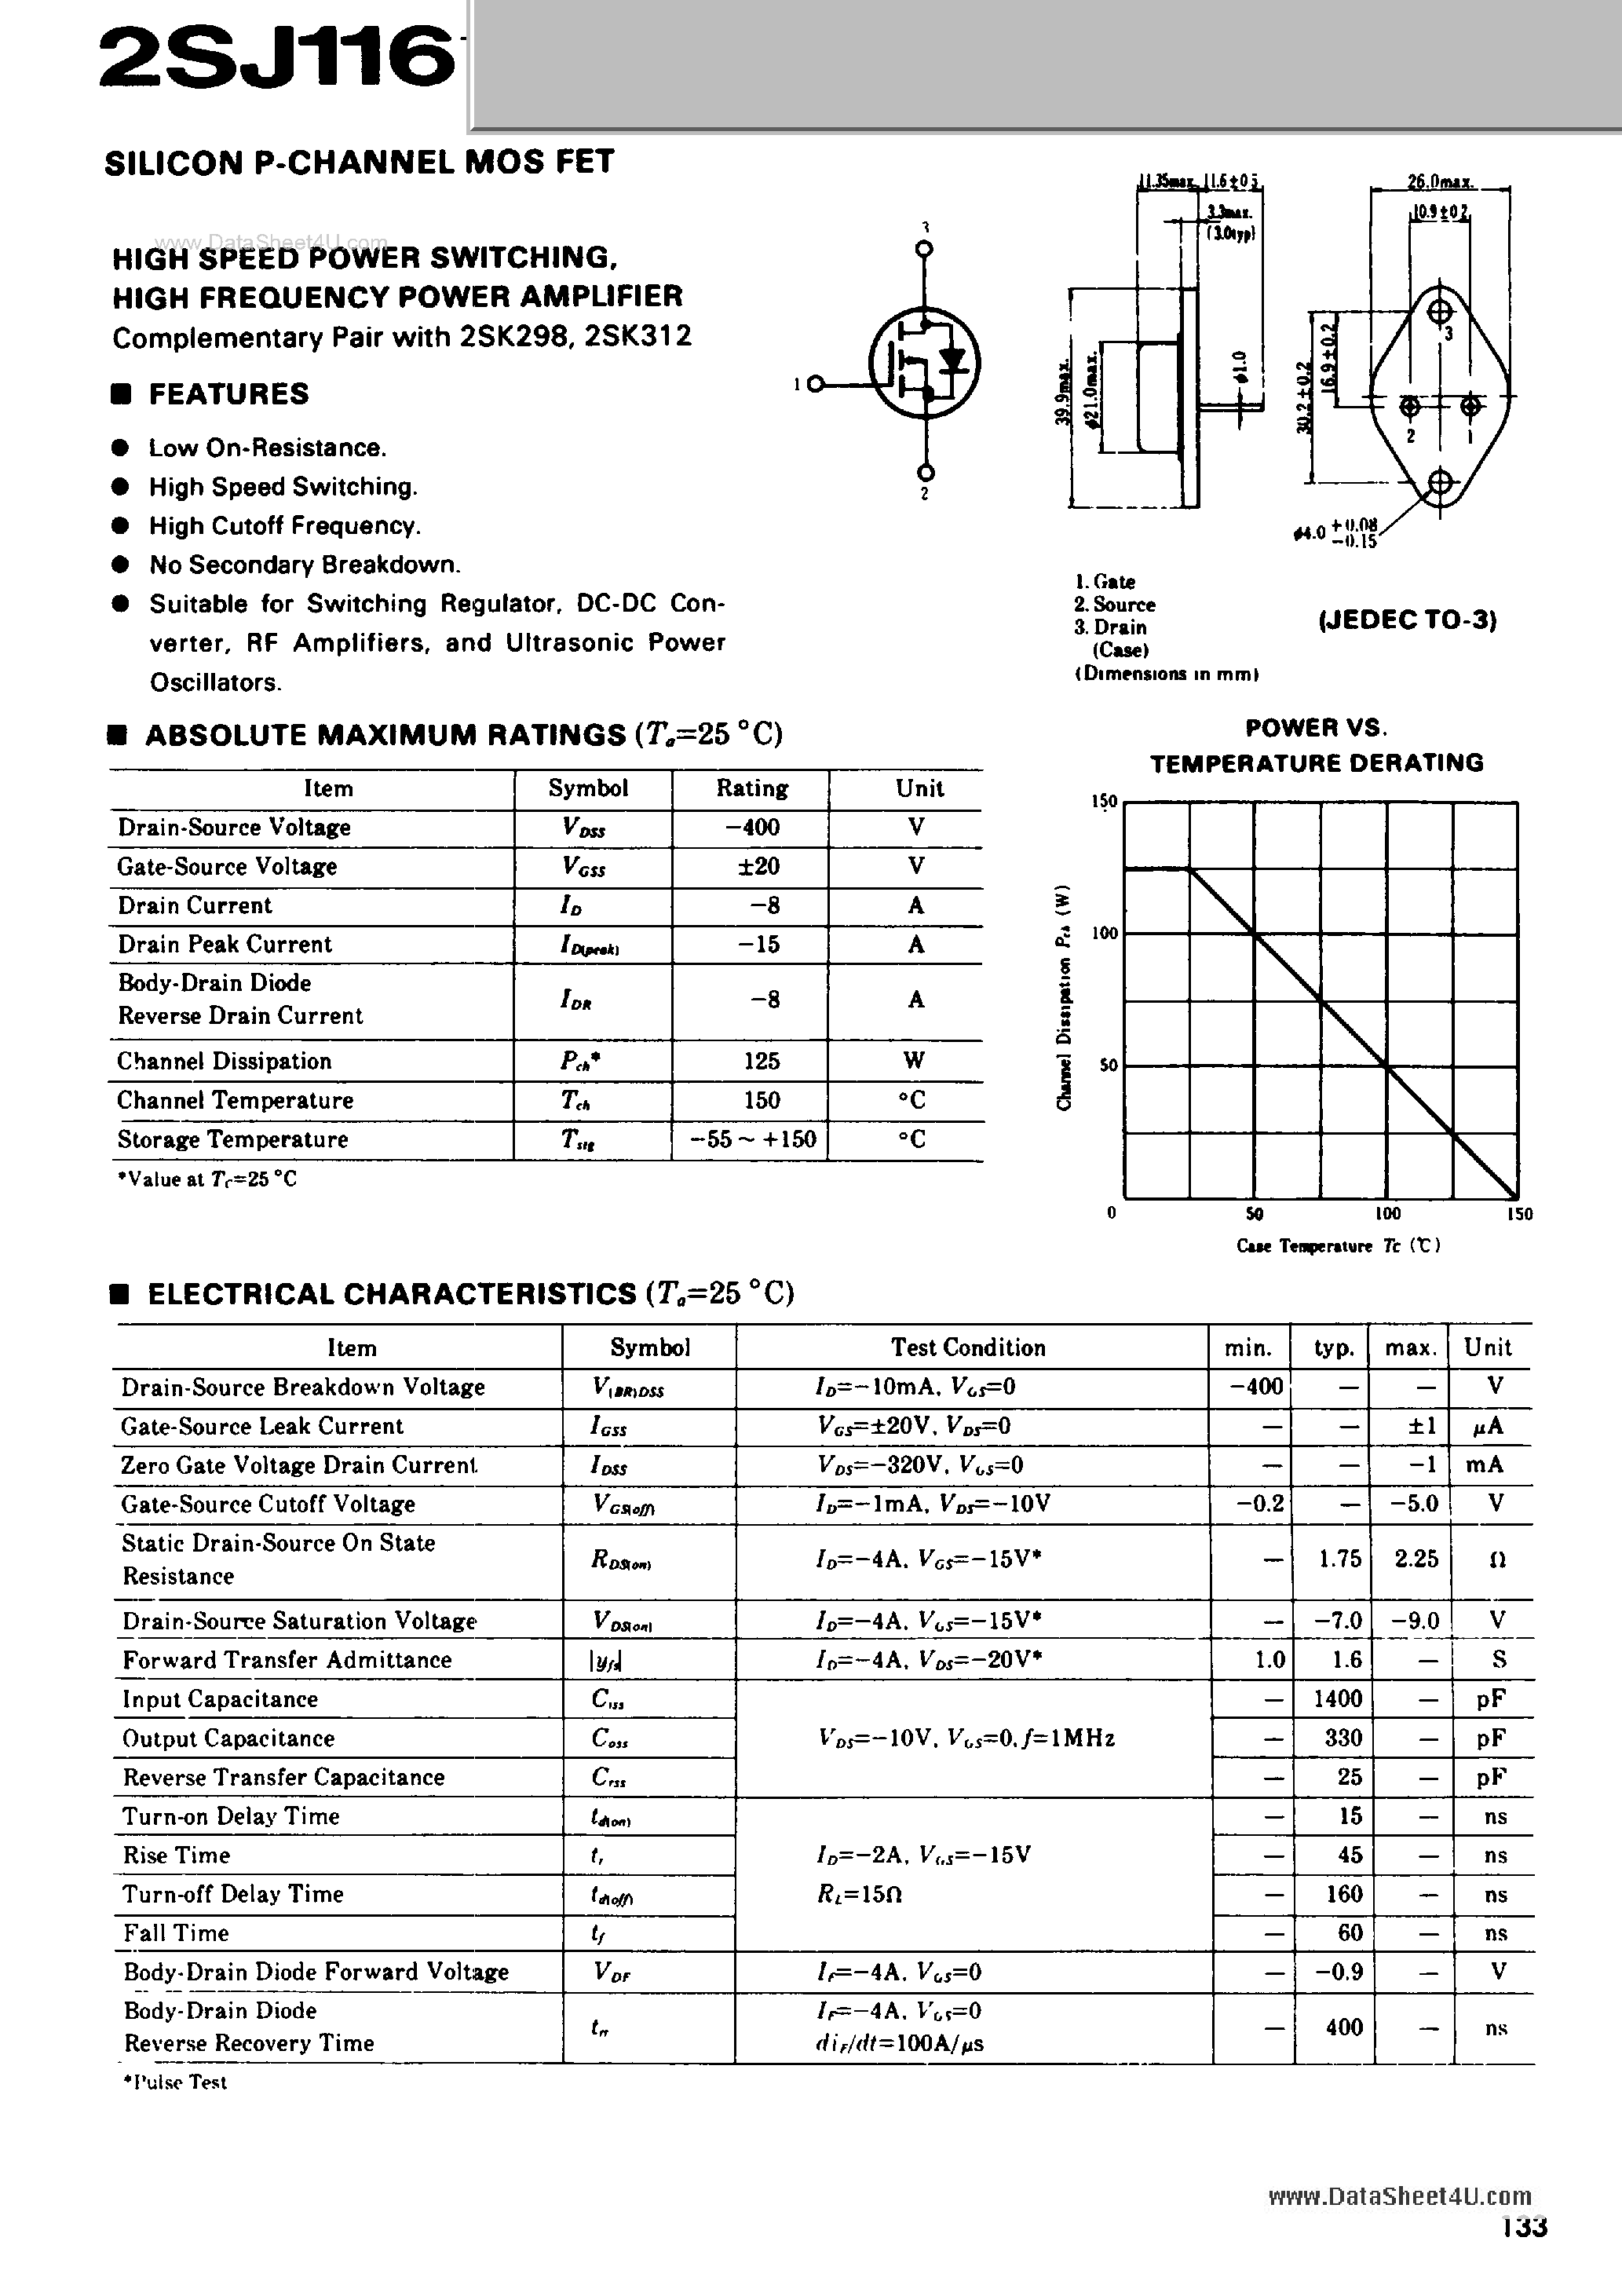 Datasheet 2SJ116 - SILICON P-CHANNEL MOS FET page 1